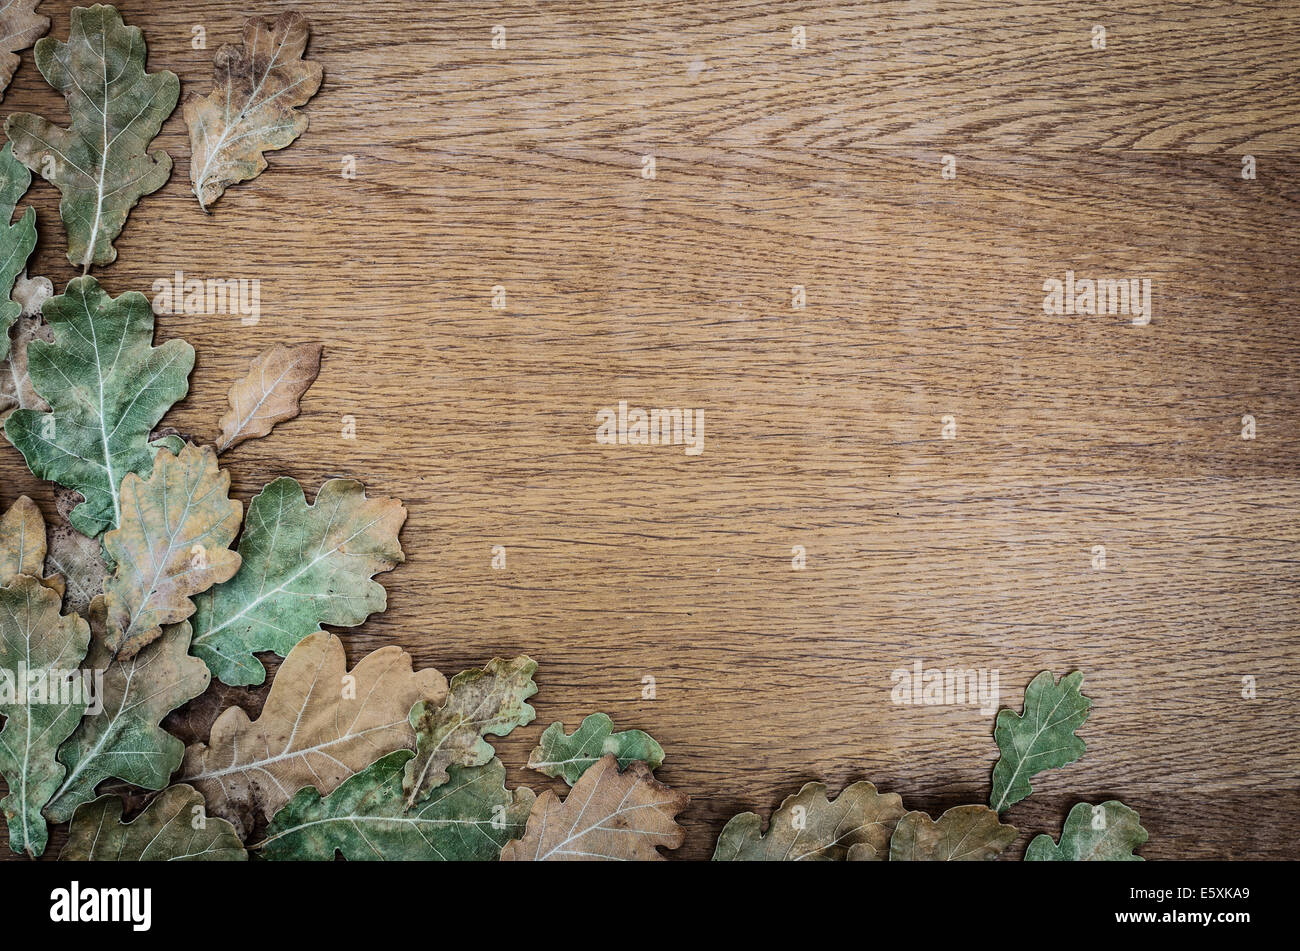 fall background on wooden board Stock Photo